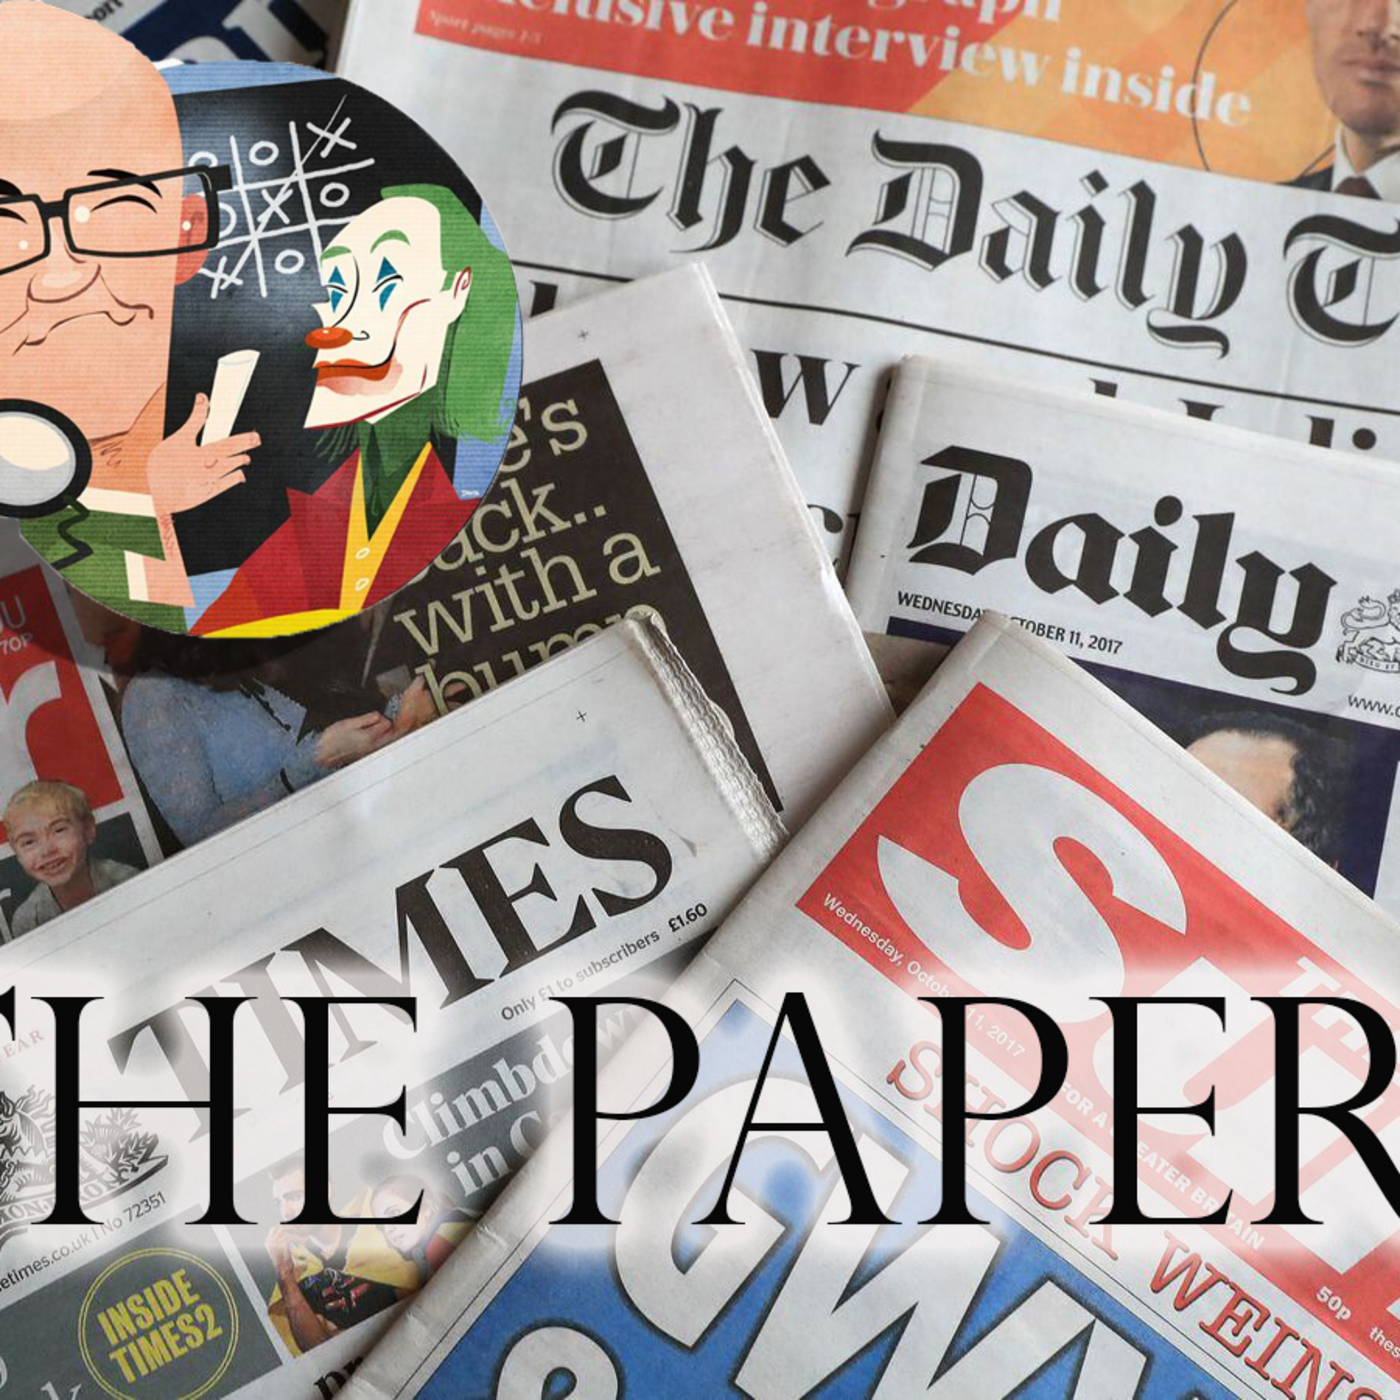 Episode 1708: The Papers - Wednesday December 13th 2023